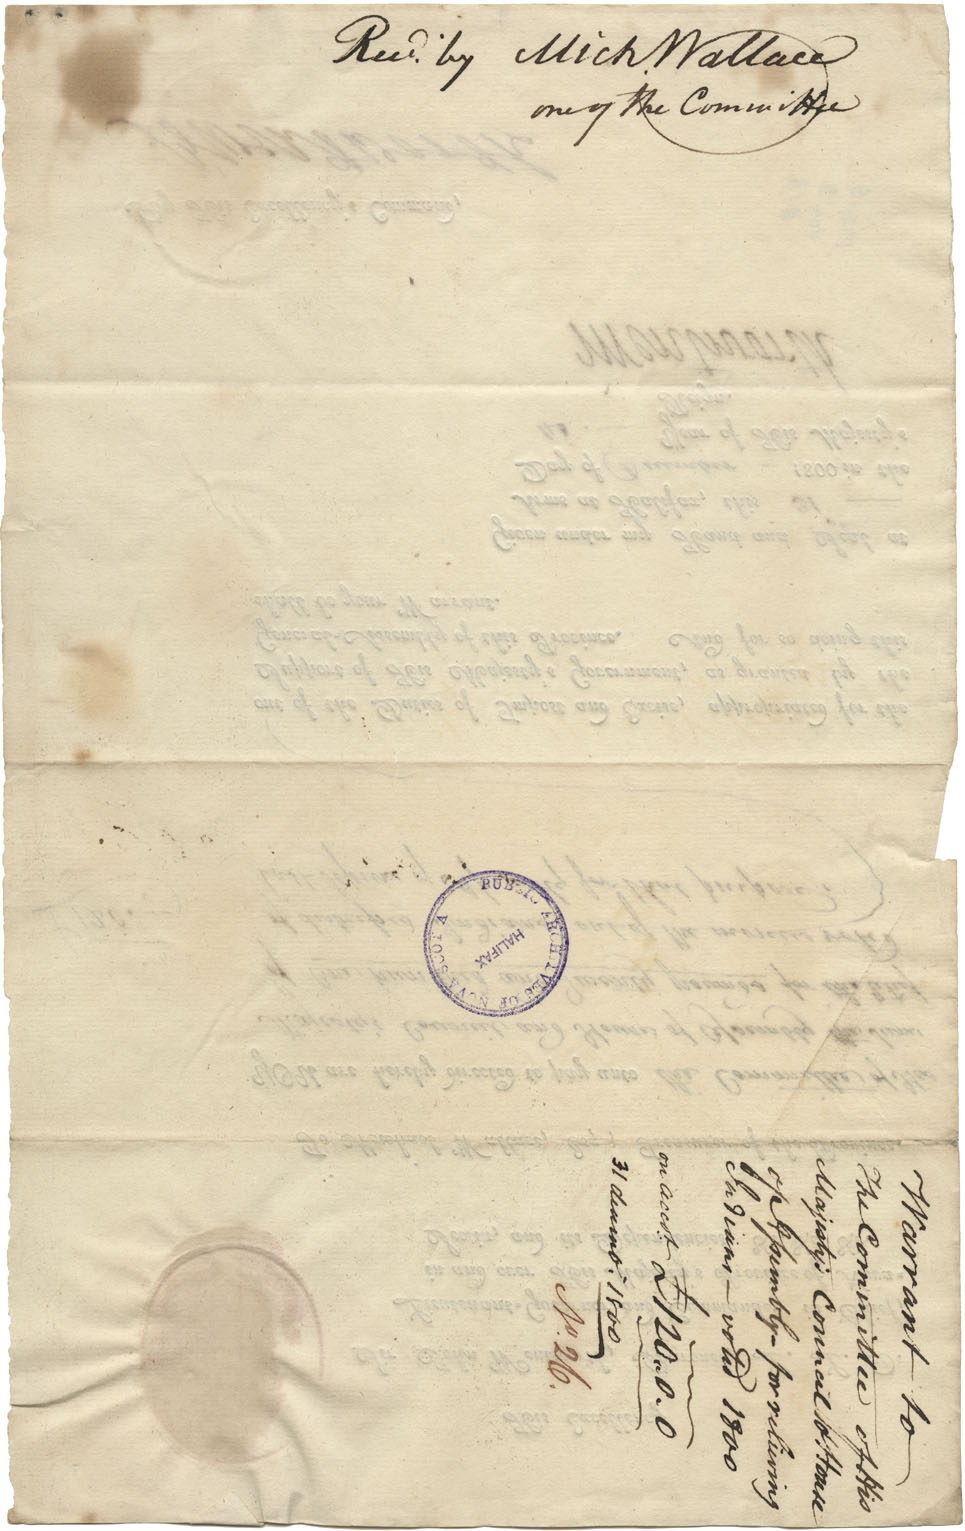 Sir John Wentworth's order to Michael Wallace, Provincial Treasurer, to pay the Committee of His Majesty's Council and House of Assembly £120 for relief of Mi'kmaq who are distressed.